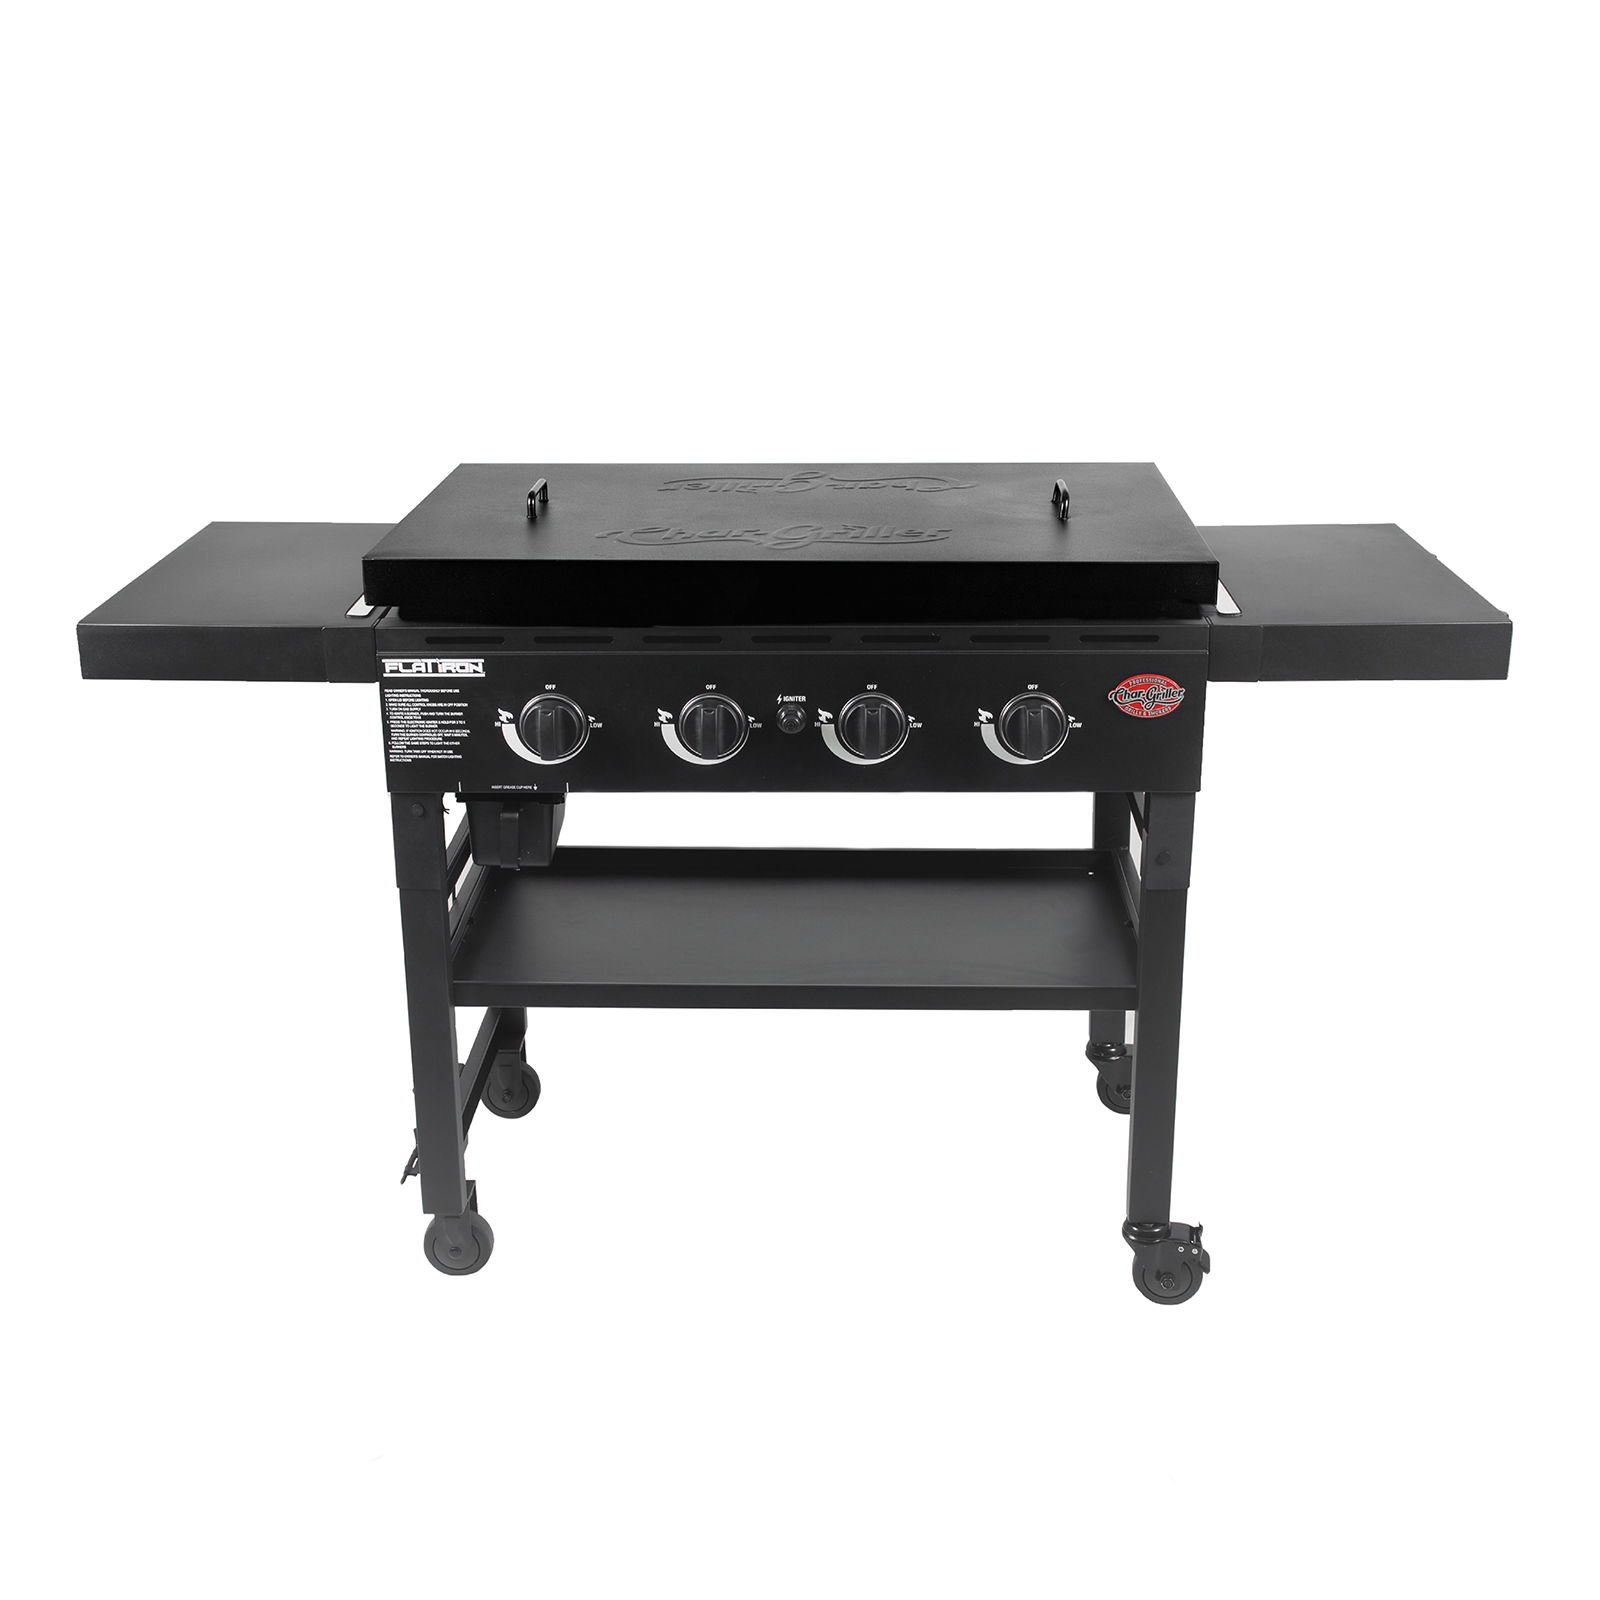 Flat Iron® Gas Griddle with Lid